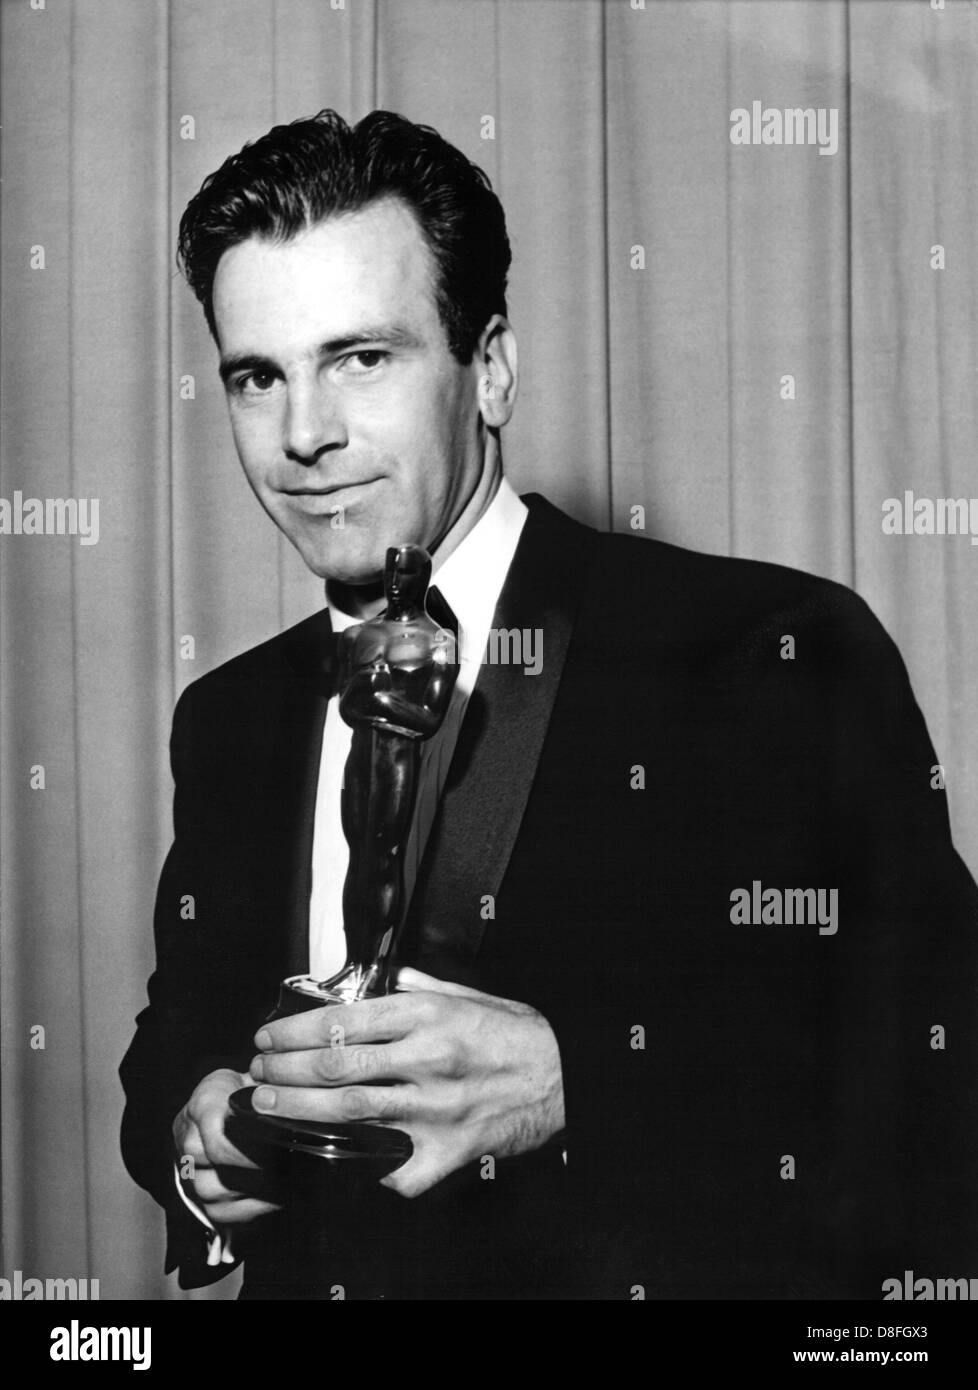 Maximilian Schell, actor, director, producer and writer from Switzerland, turns 70 on the 8th of December in 2000. He received the Academy Award (oscar) as best actor in a leading role in 'Judgement at Nuremberg'. Picture from 1961. Stock Photo